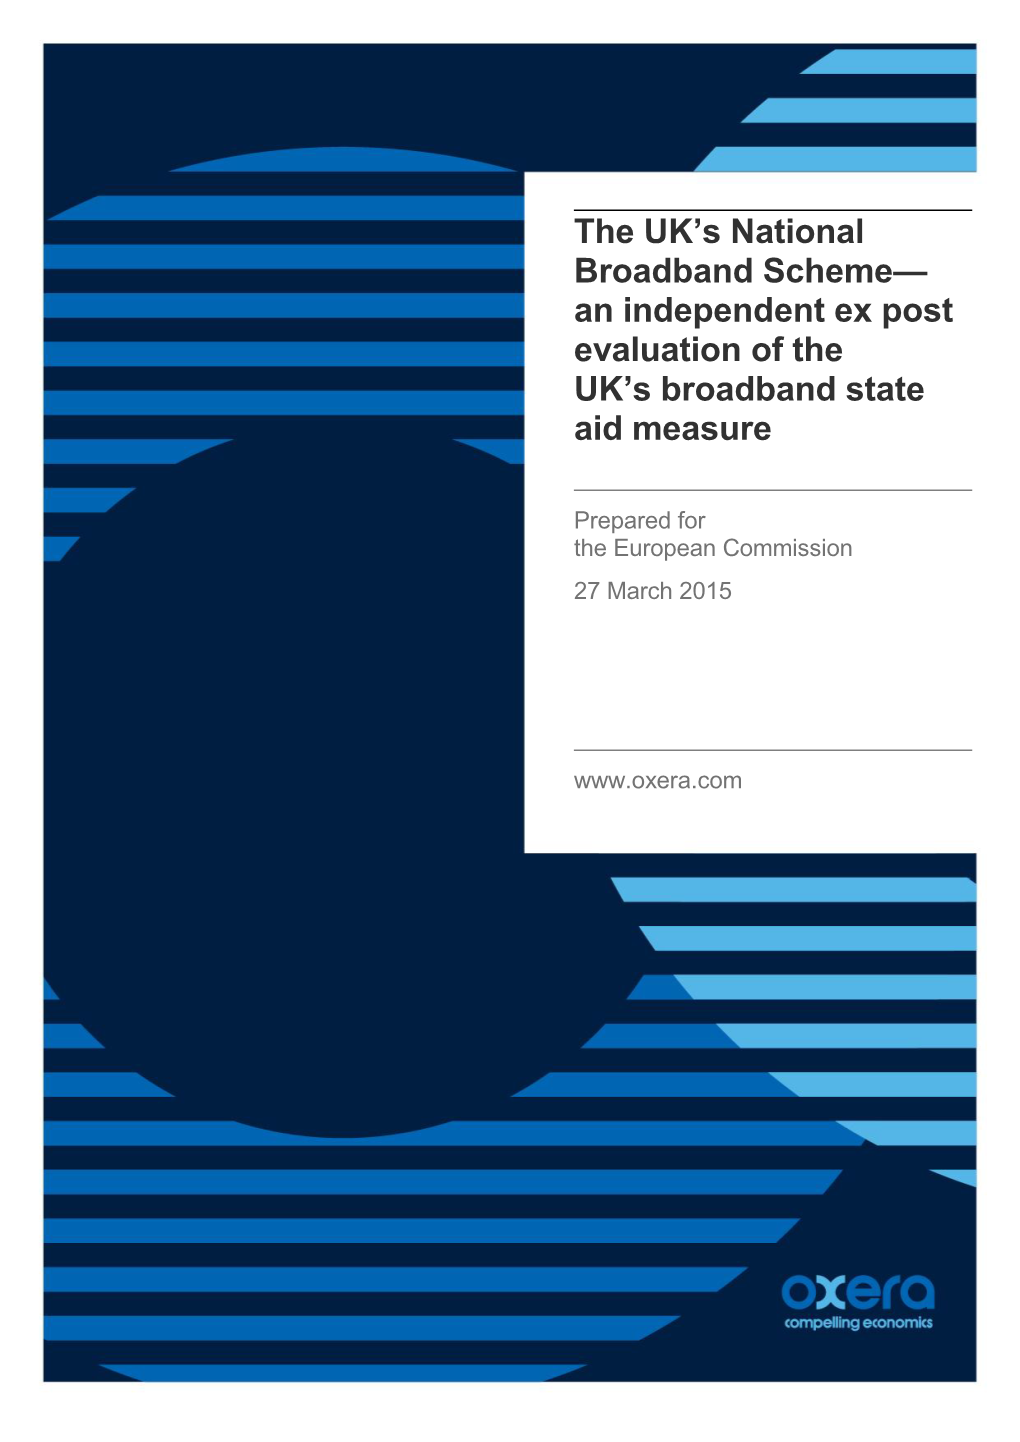 An Independent Ex Post Evaluation of the UK's Broadband State Aid